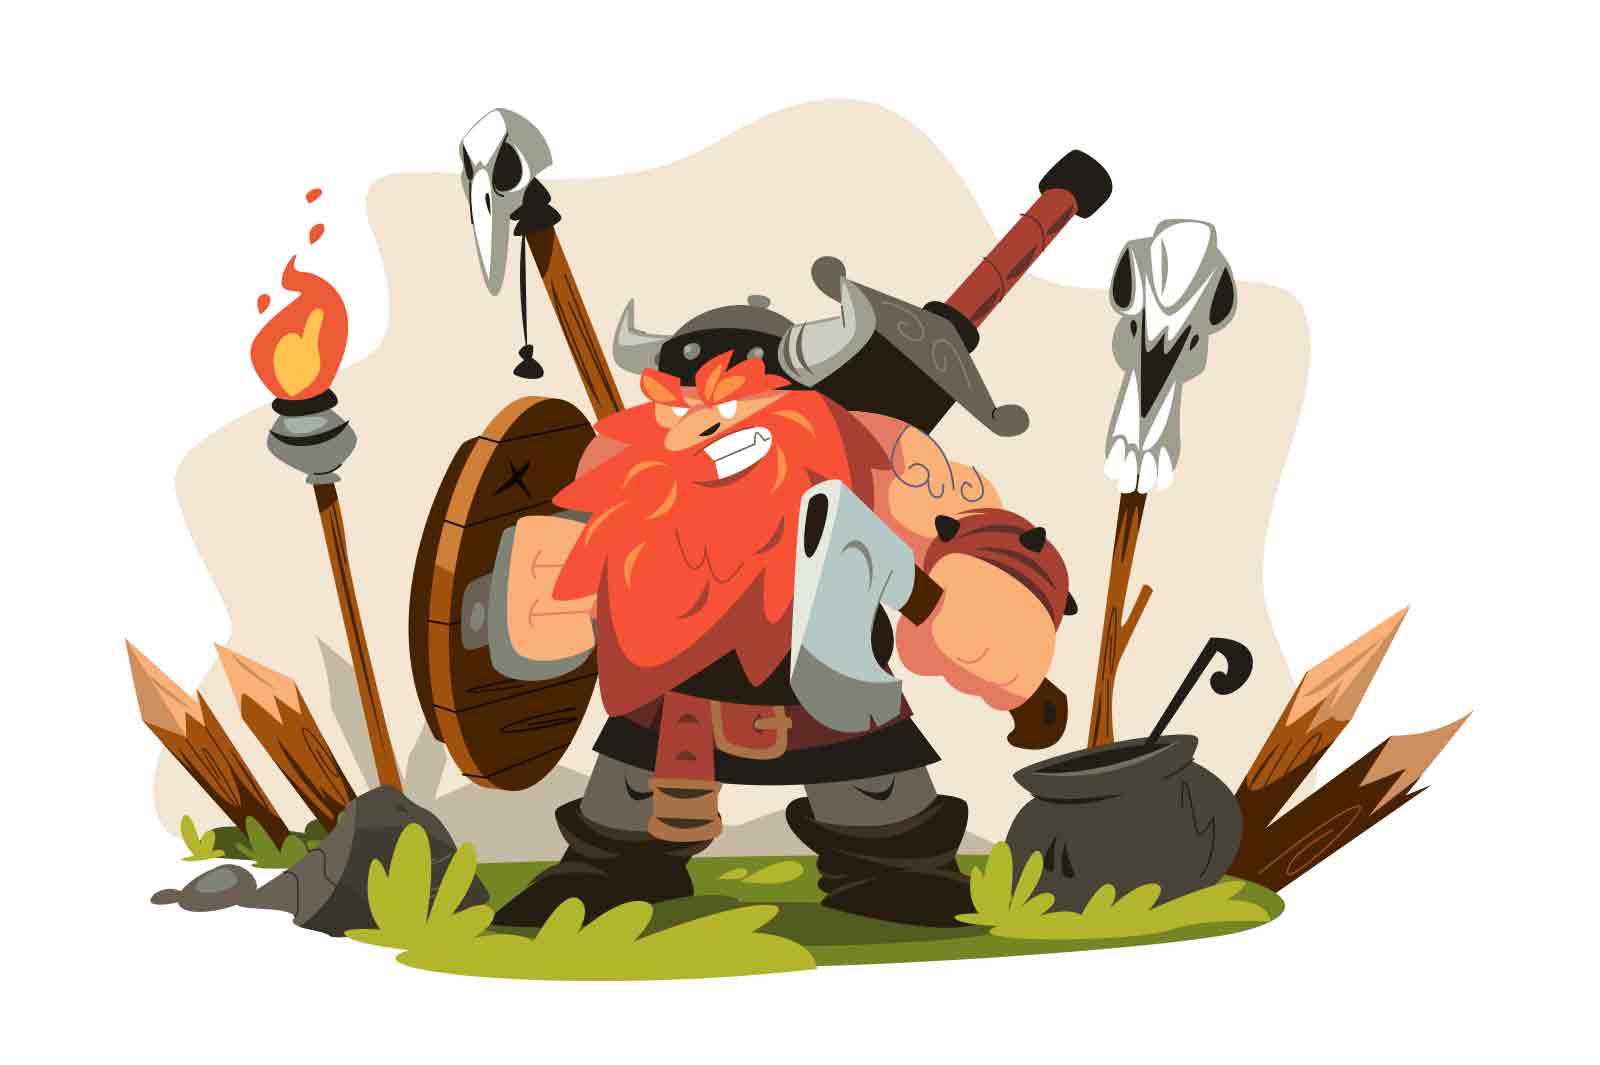 Viking warrior on battle field vector illustration. Man character with sword, axe, and helmet with horns flat style concept